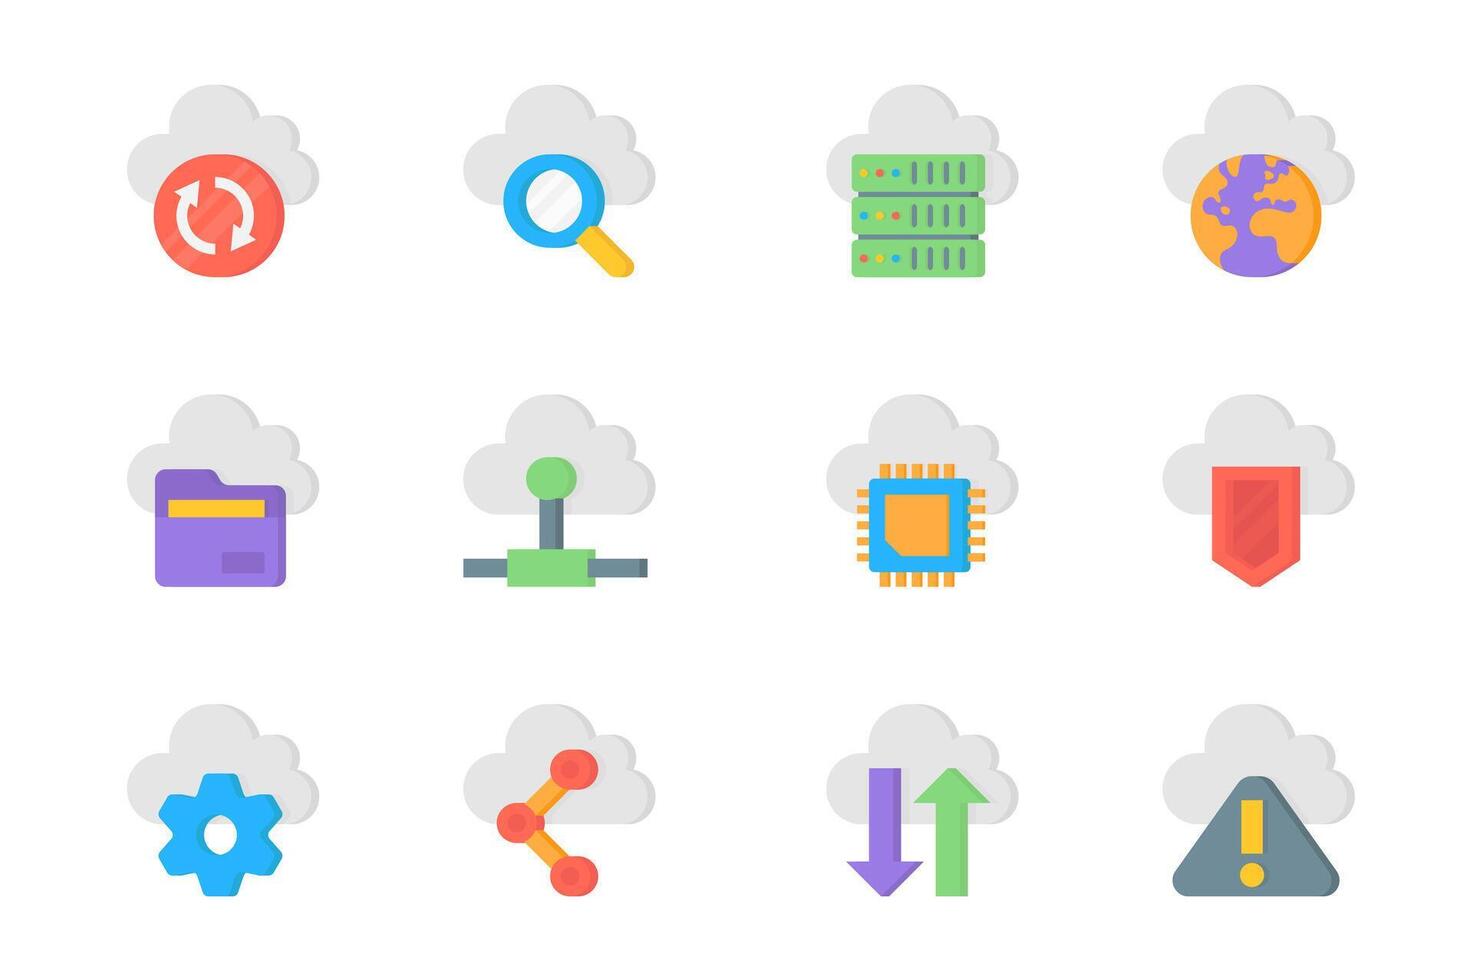 Computer cloud 3d icons set. Pack flat pictograms of sync, search, server, database, computing, internet, online sharing, chip, protect data and other. Vector elements for mobile app and web design